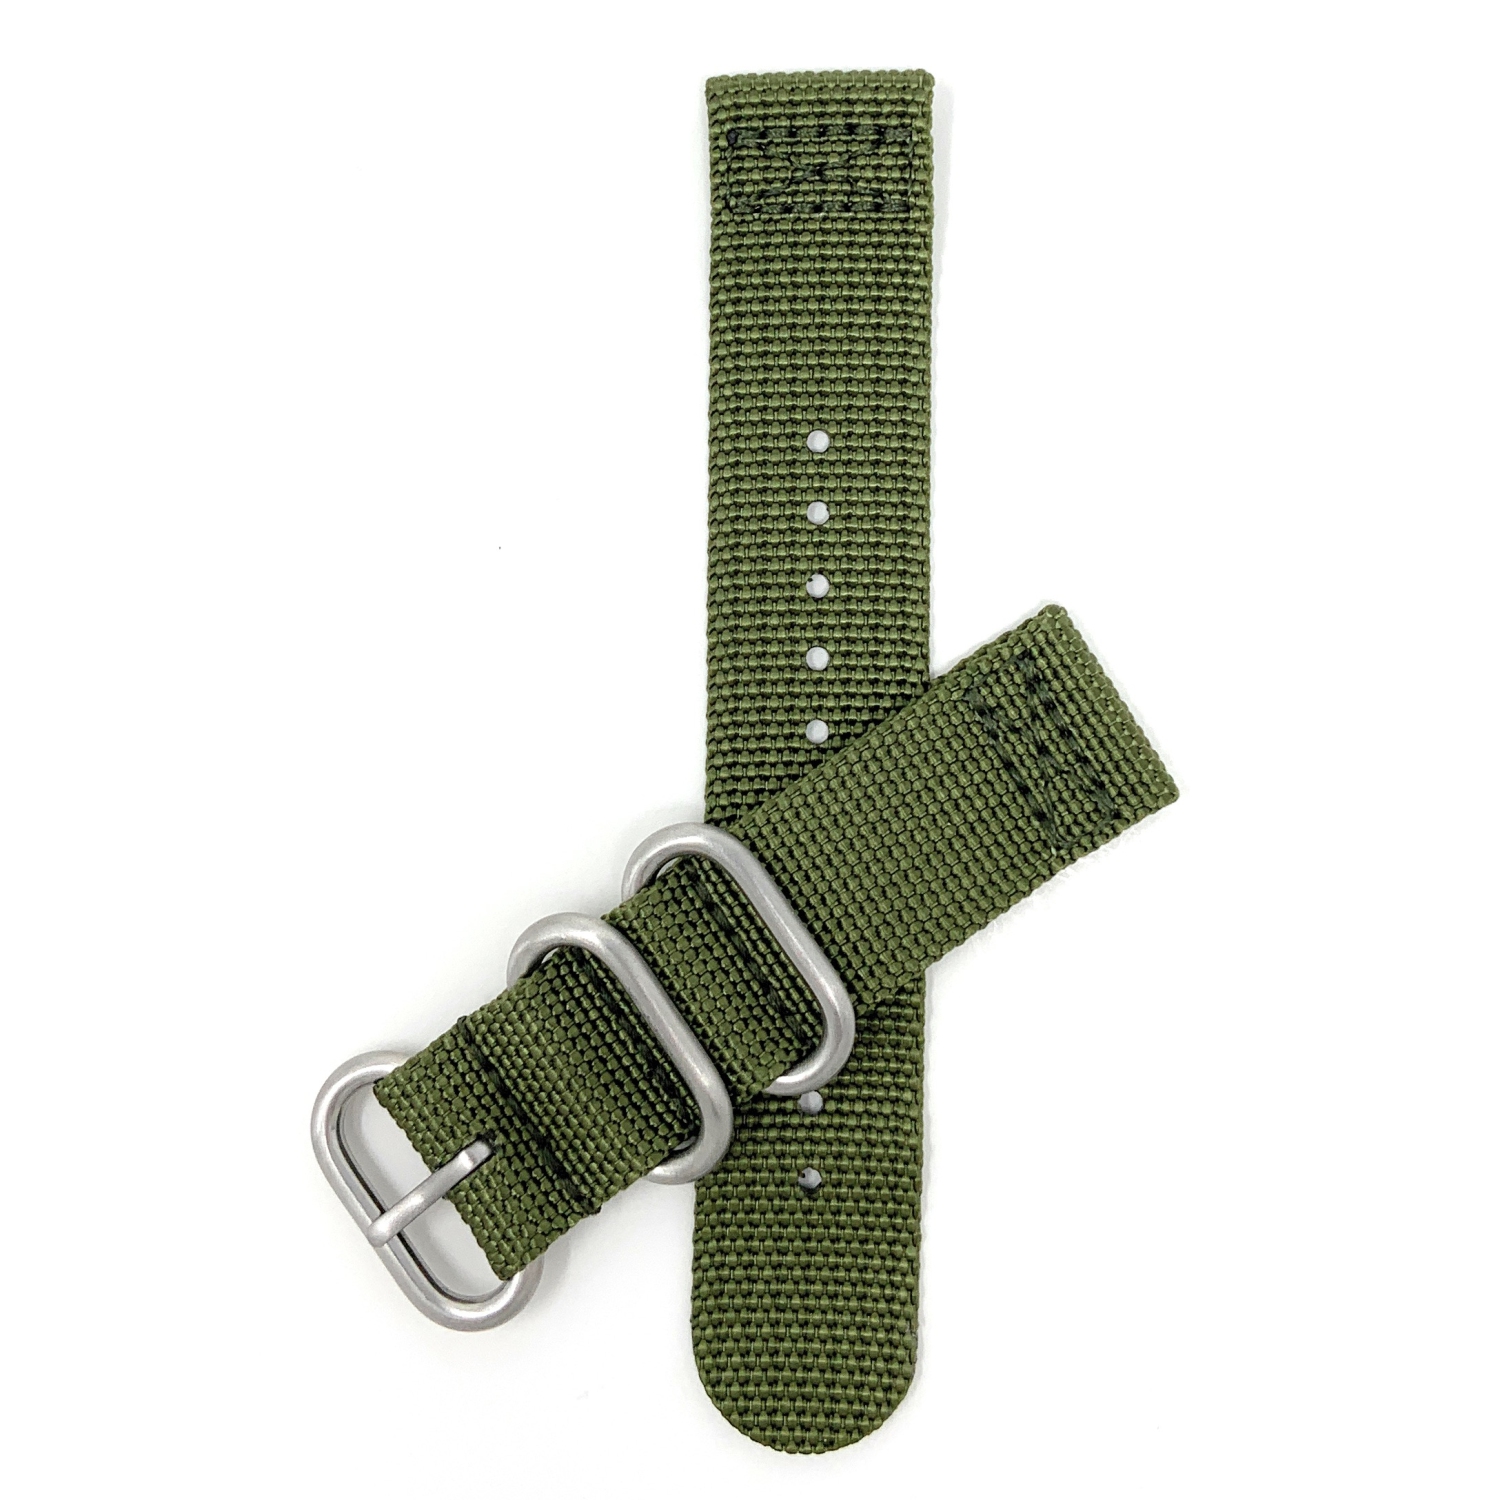 Bandini 2 Piece Nylon Zulu Smart Watch Band Strap For Withings Nokia Steel HR 40mm, Horizon - 20mm, Green